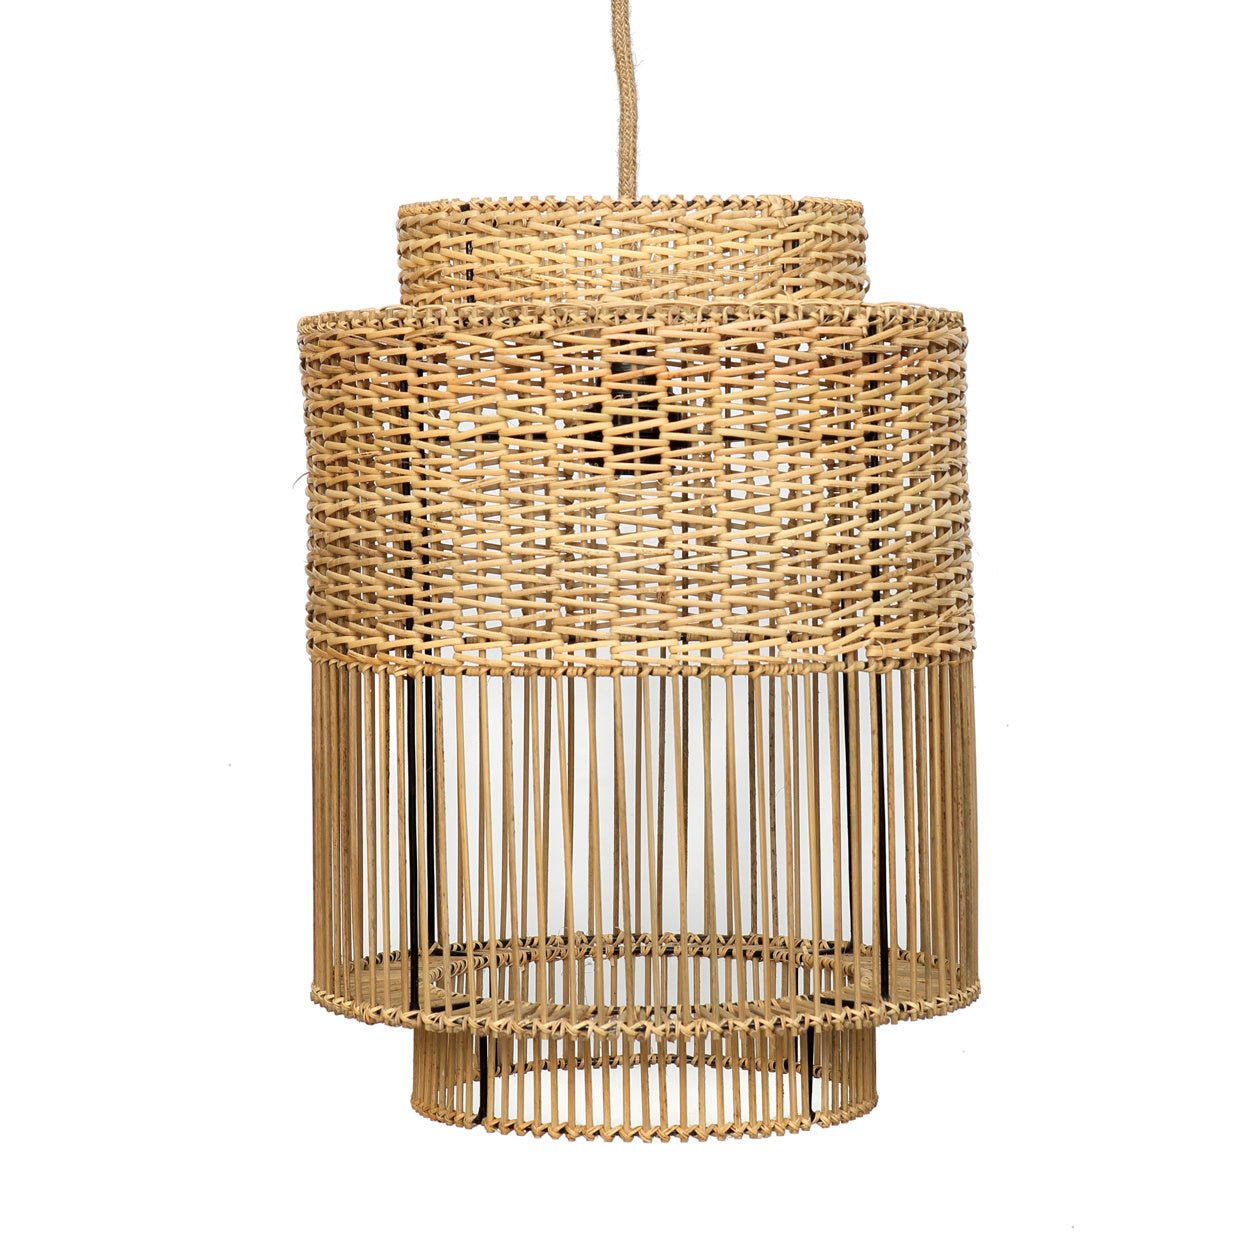 The colonial hanging lamp - natural